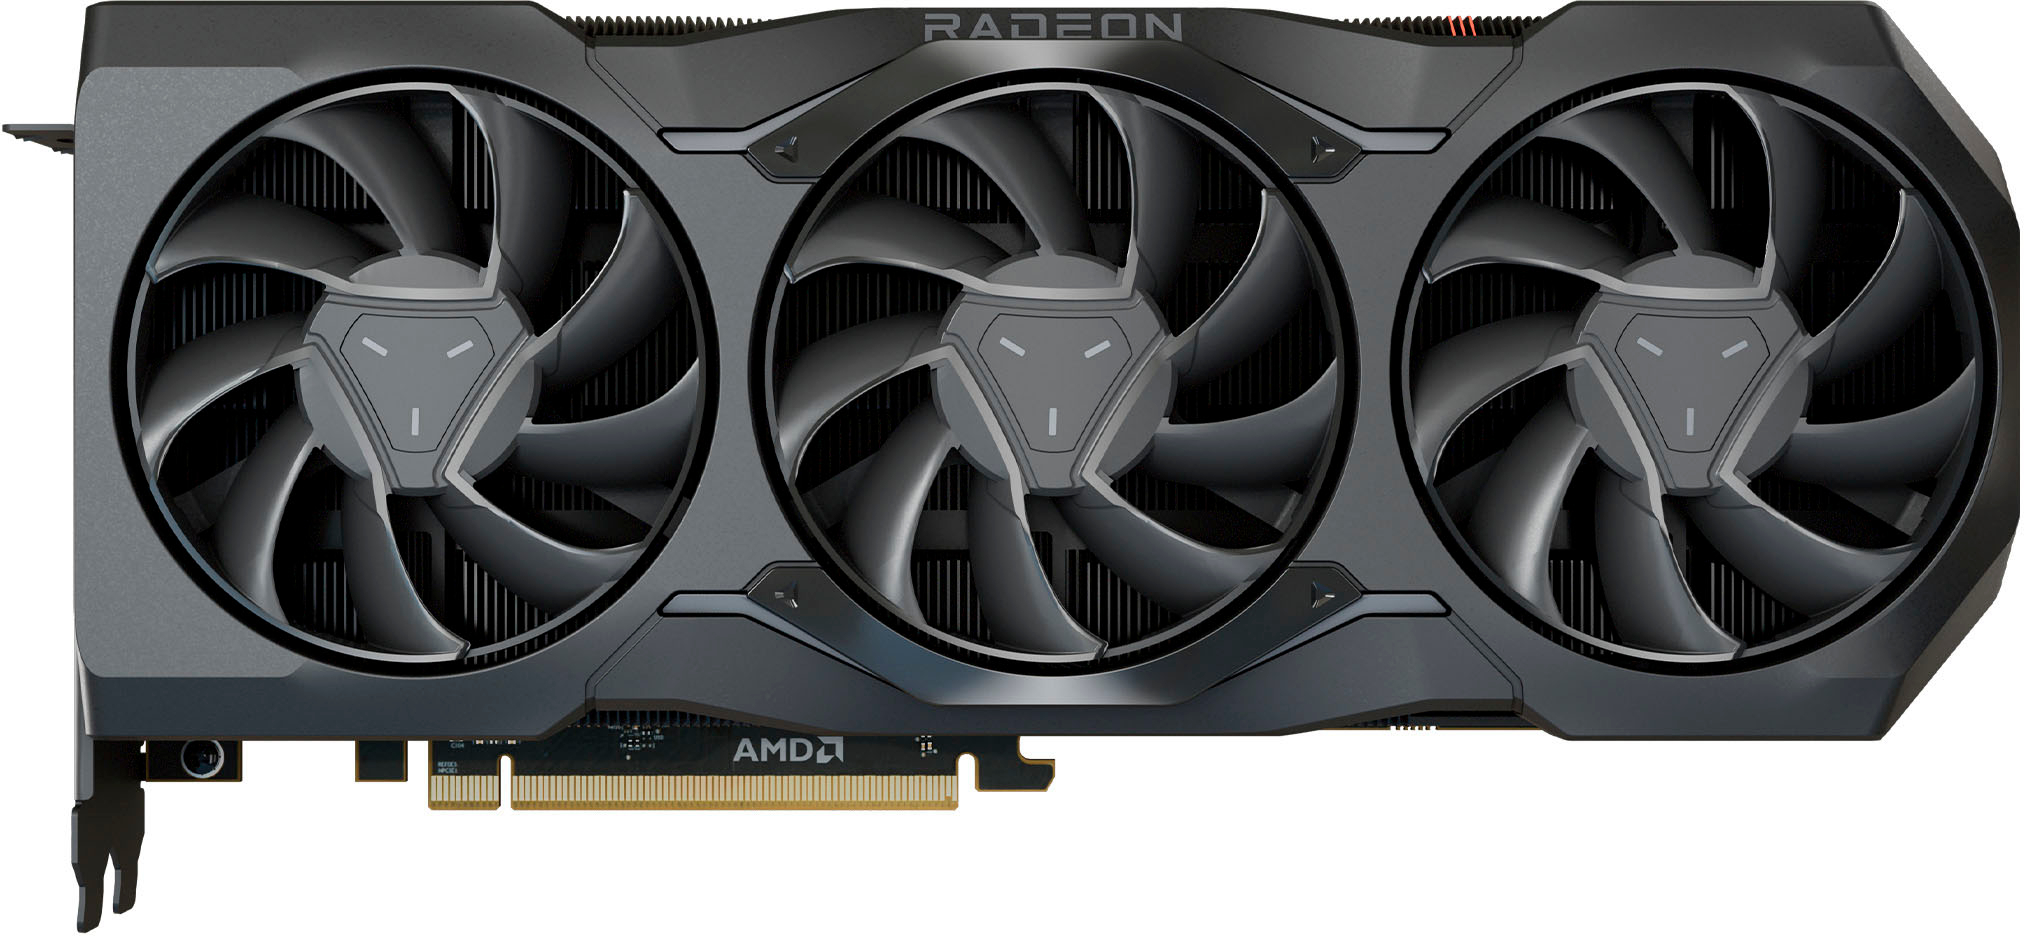 AMD Radeon RX 7900 XTX 24 GB GPU Hits Its Lowest Price Yet of $799 US,  Comes With Starfield Premium Edition